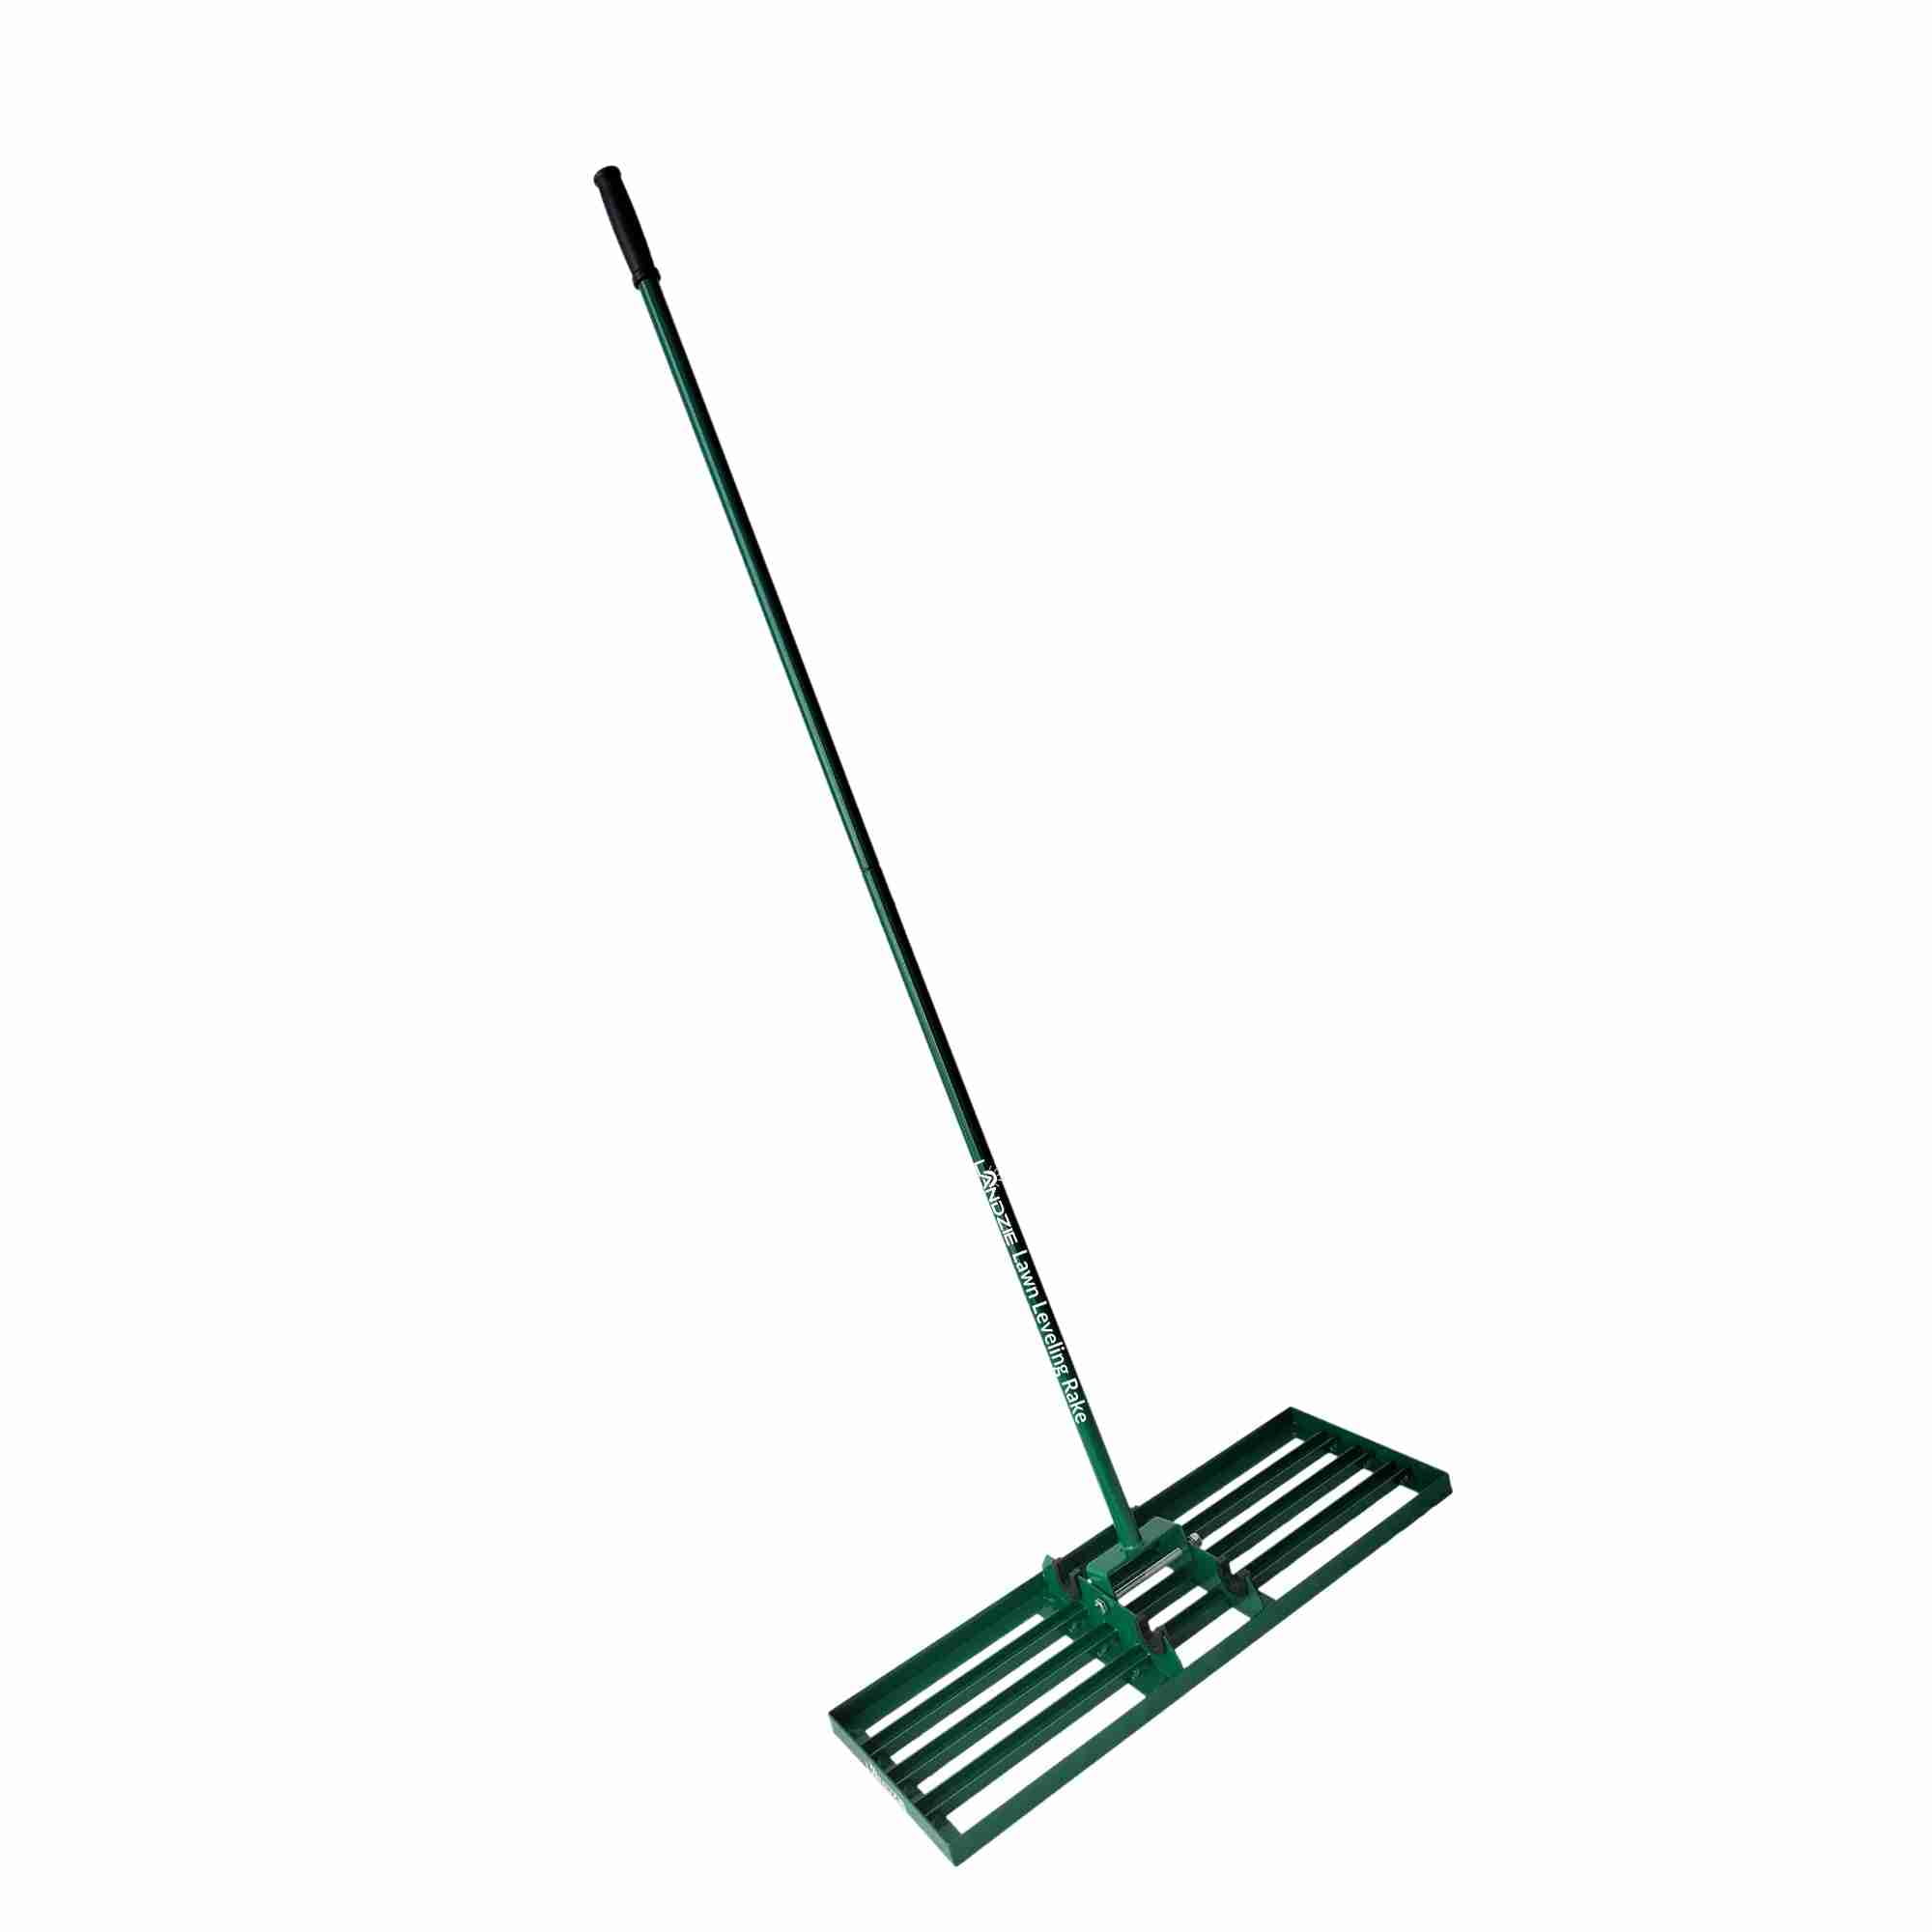 Landzie Lawn Leveling Rake - 36 Inch Wide 72 inch Handle Powder Coated  Yard, Garden, and Lawn Leveling Tool - Professional Lawn Care Landscaping  Tools 